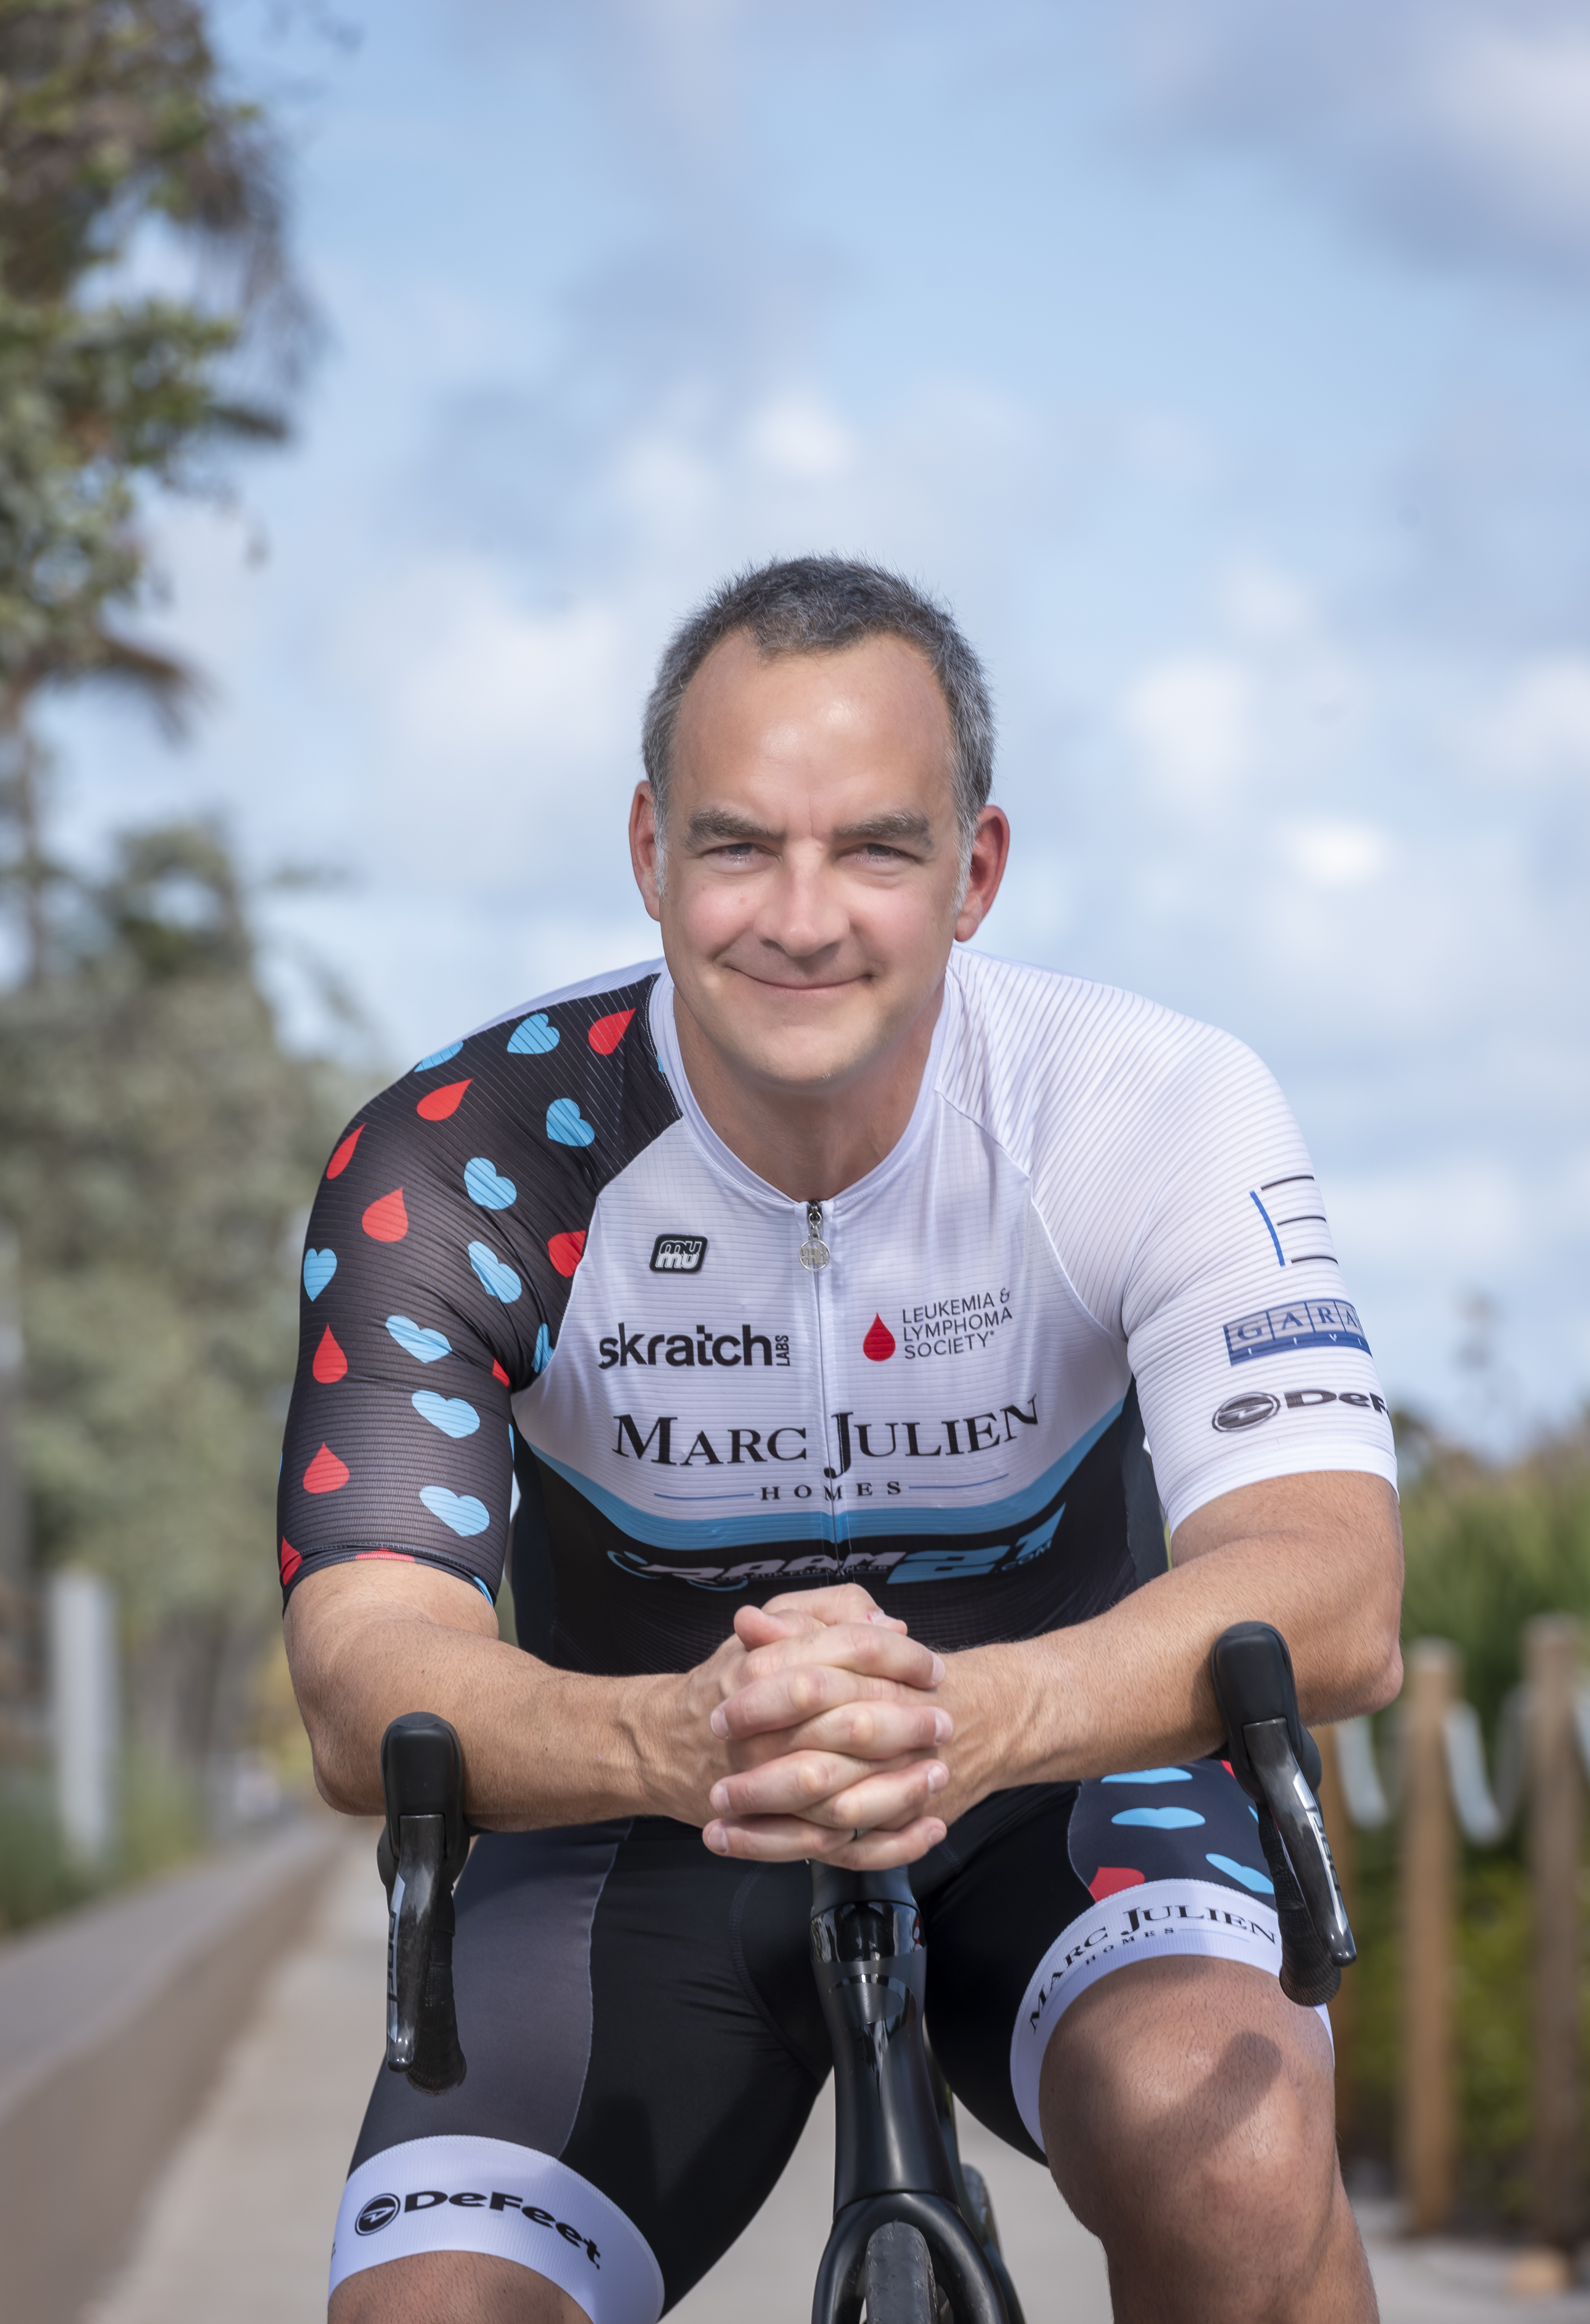 Marc Julien, CEO, Marc Julien Homes, is a cancer survivor and participated in the Race Across America cycling race.